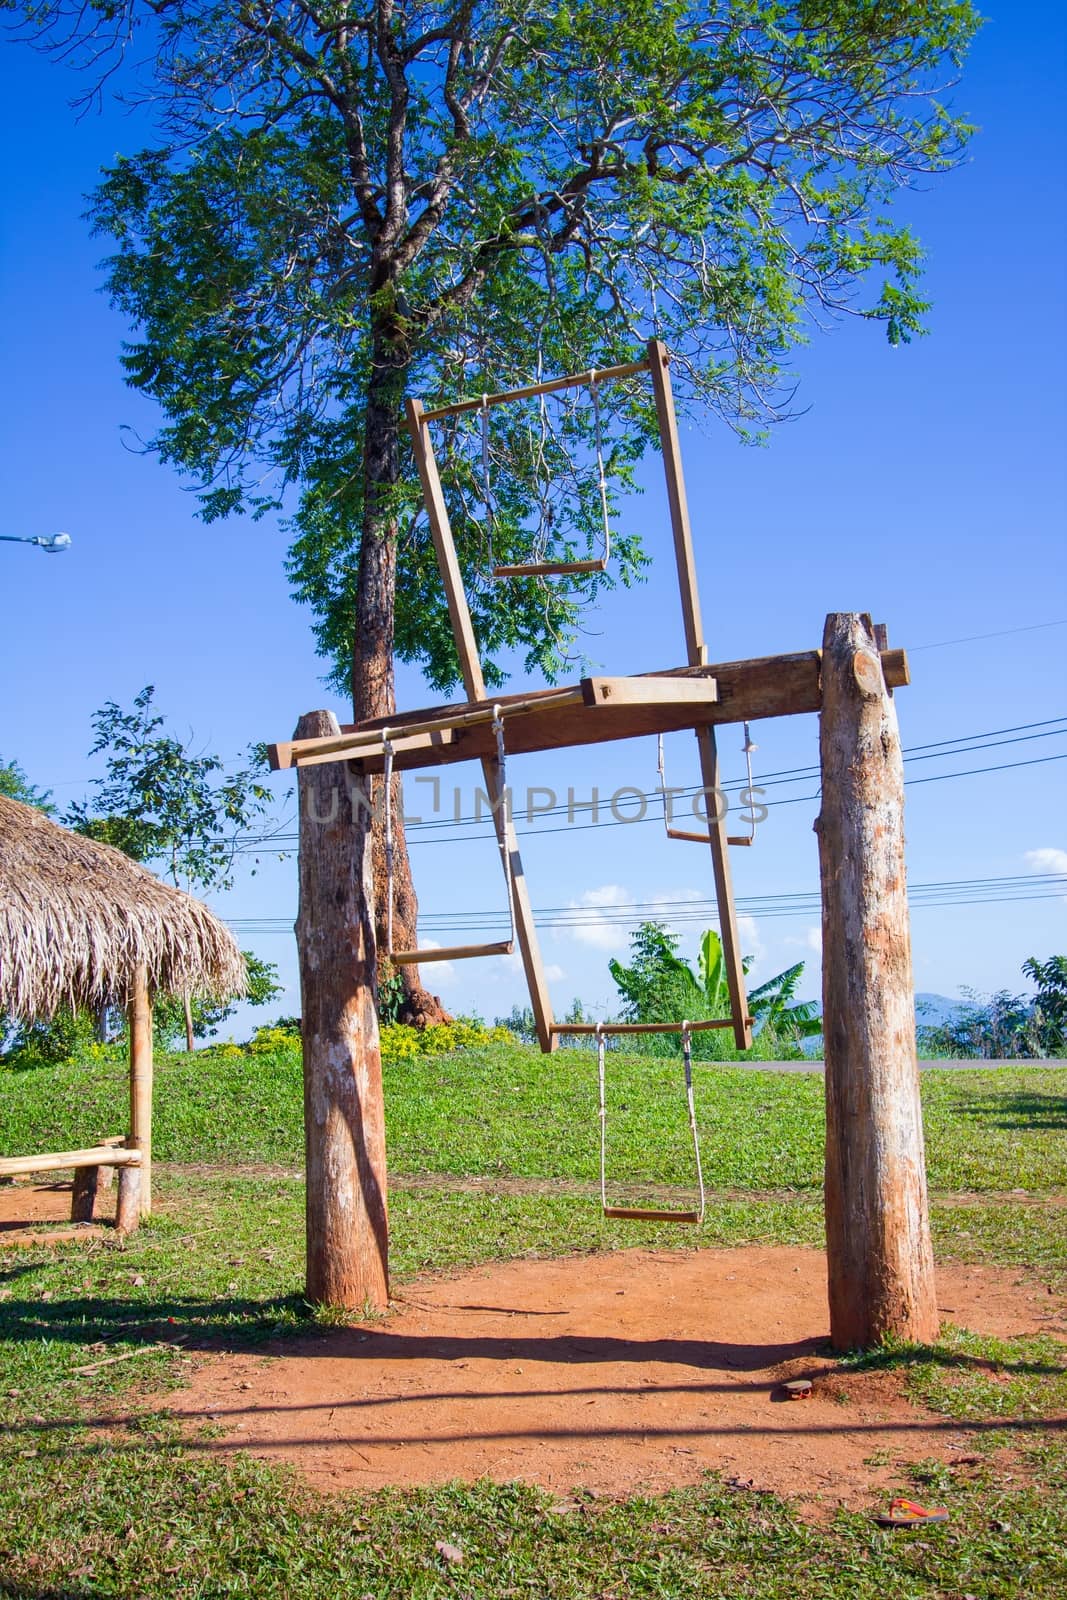 traditional swing of hilltribe people in thailand by a3701027